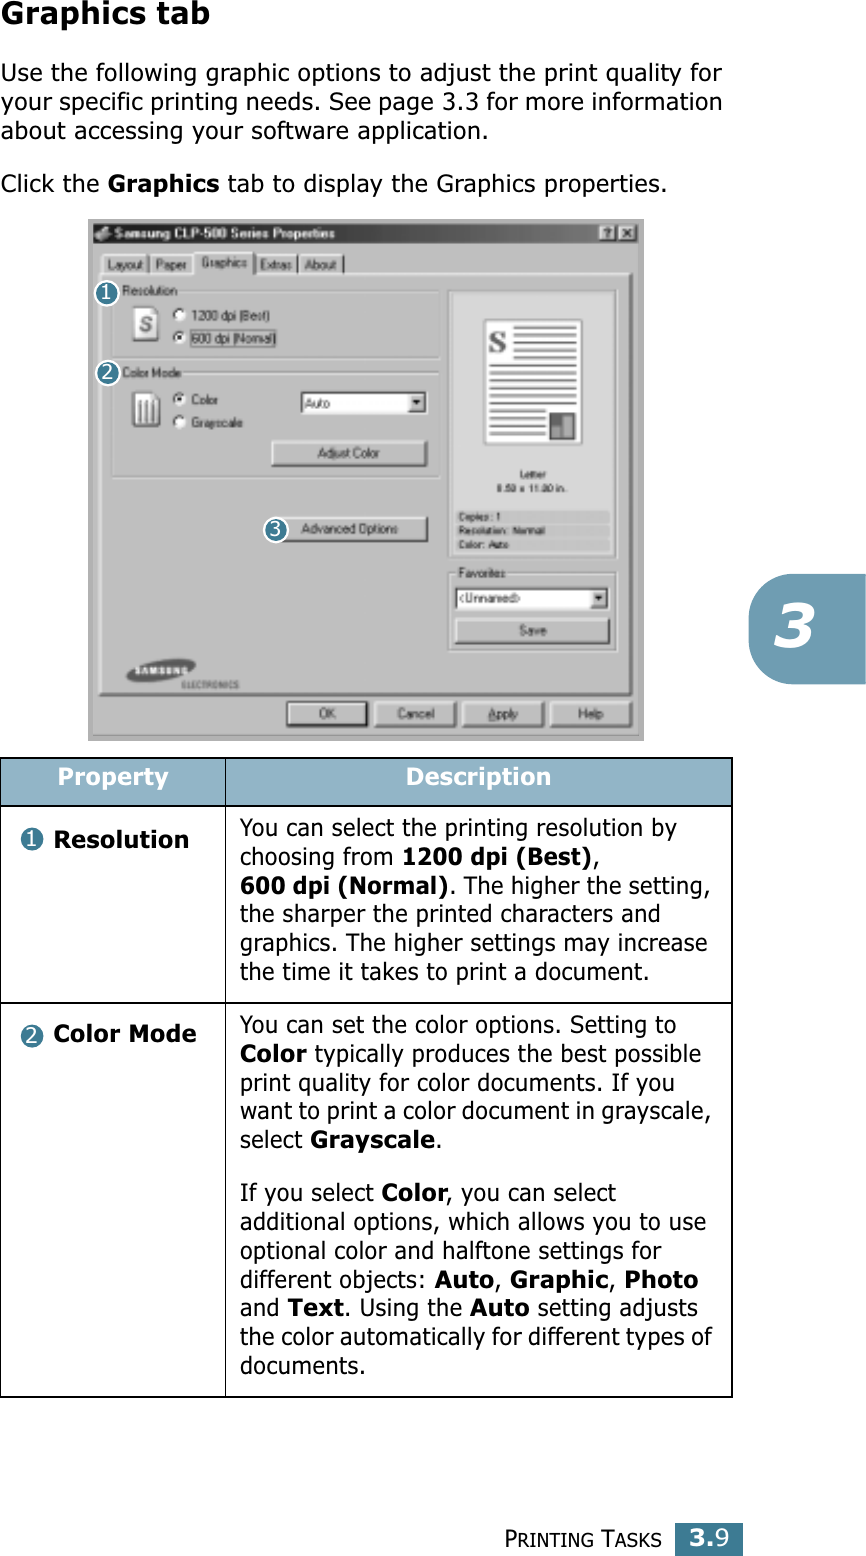 PRINTING TASKS3.93Graphics tabUse the following graphic options to adjust the print quality for your specific printing needs. See page 3.3 for more information about accessing your software application. Click the Graphics tab to display the Graphics properties.  Property DescriptionResolutionYou can select the printing resolution by choosing from 1200 dpi (Best), 600 dpi (Normal). The higher the setting, the sharper the printed characters and graphics. The higher settings may increase the time it takes to print a document. Color ModeYou can set the color options. Setting to Color typically produces the best possible print quality for color documents. If you want to print a color document in grayscale, select Grayscale. If you select Color, you can select additional options, which allows you to use optional color and halftone settings for different objects: Auto, Graphic, Photo and Text. Using the Auto setting adjusts the color automatically for different types of documents.12312